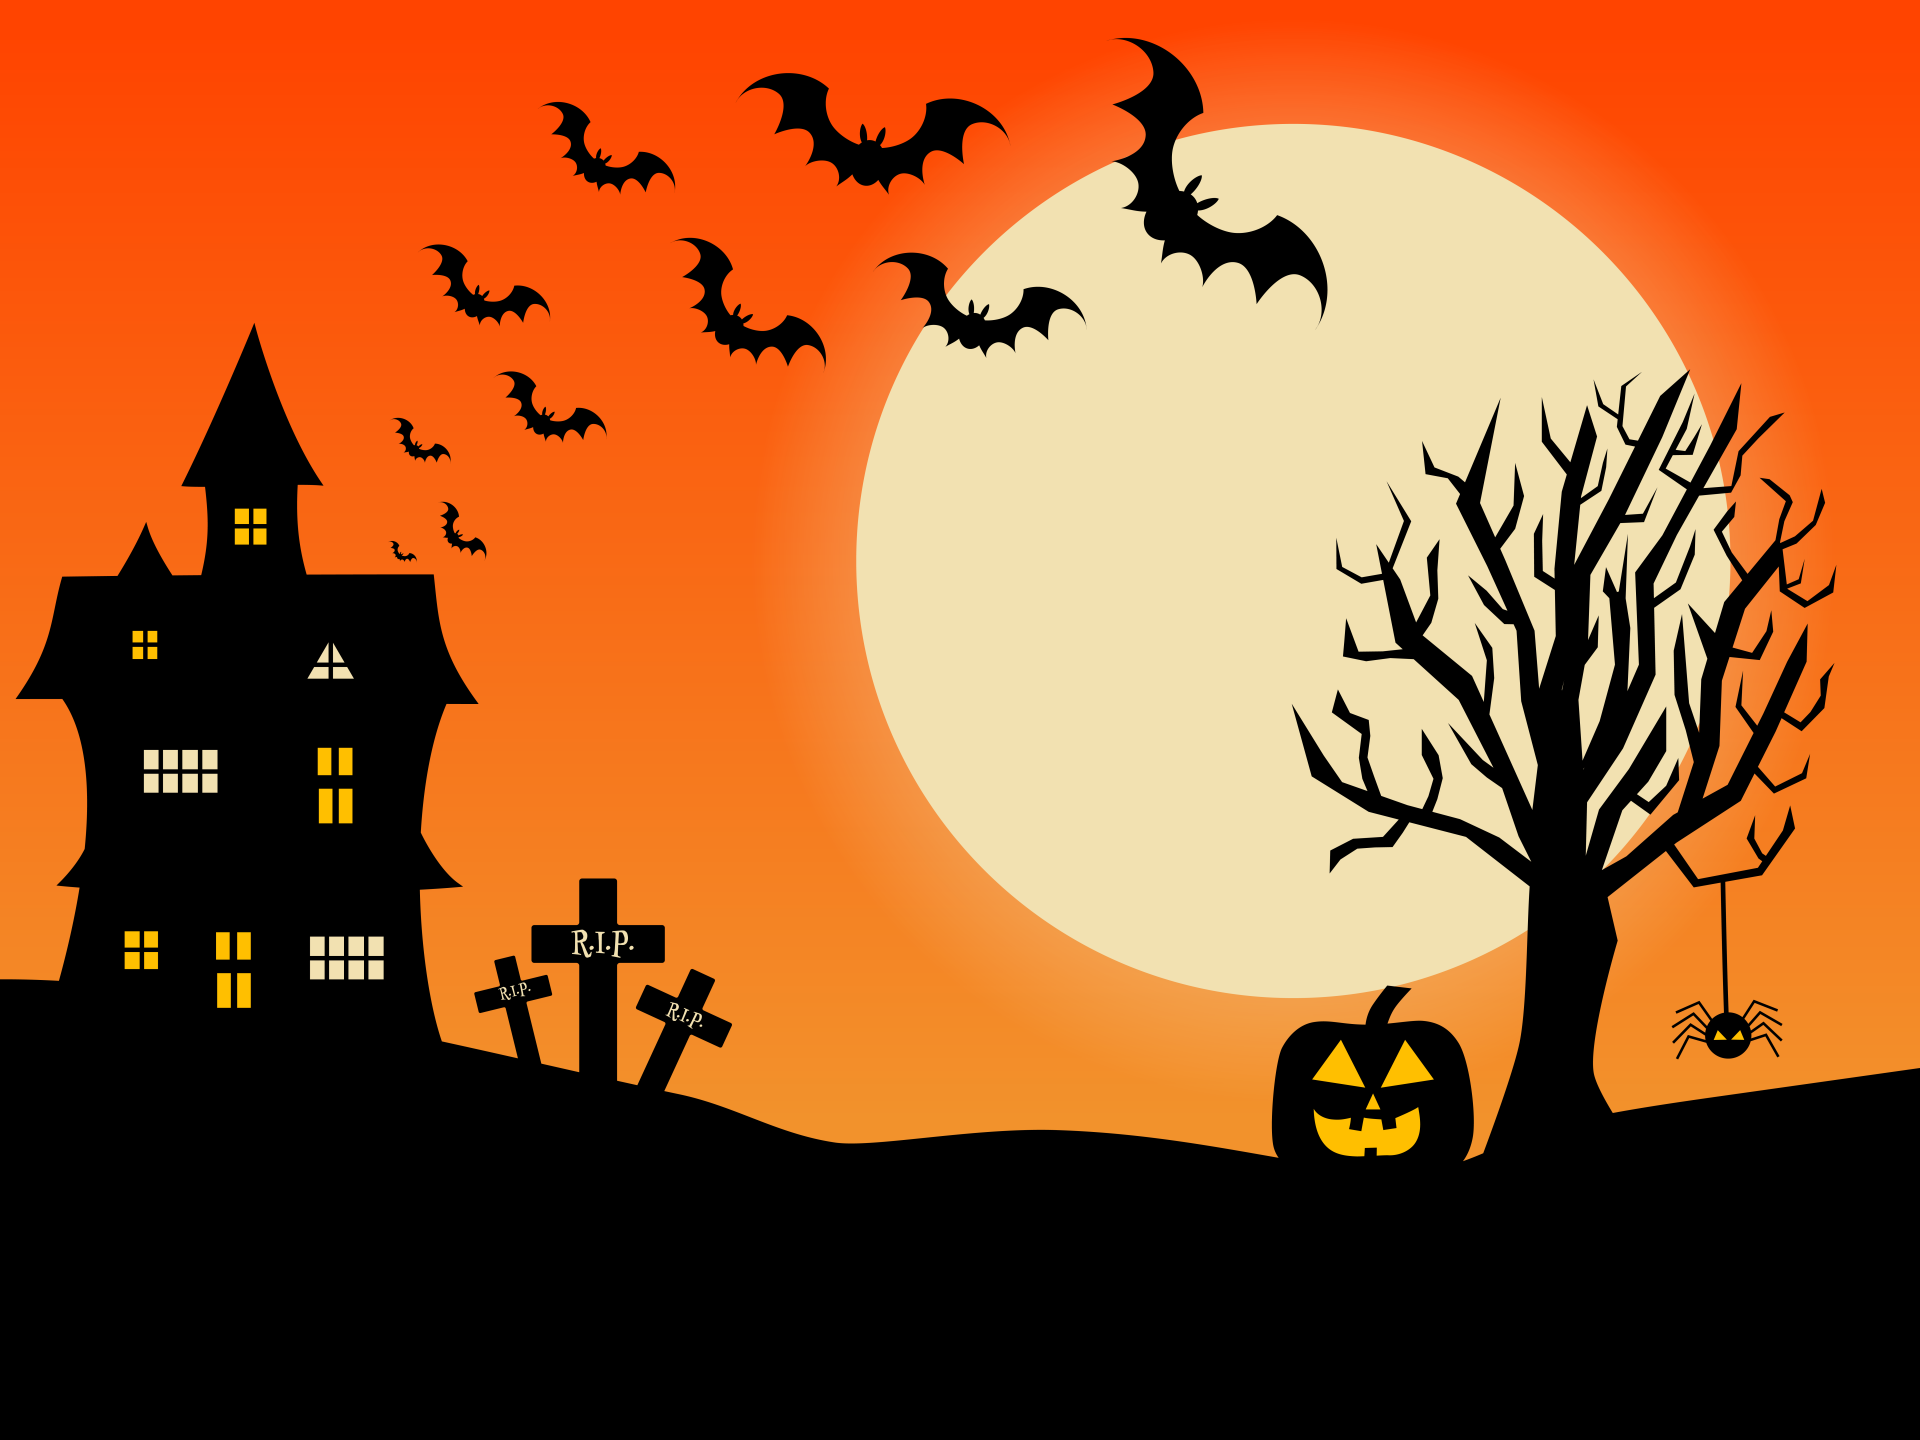 Halloween landscape illustration with a haunted house, bats, moon, tree, gravestones and a Jack o Lantern